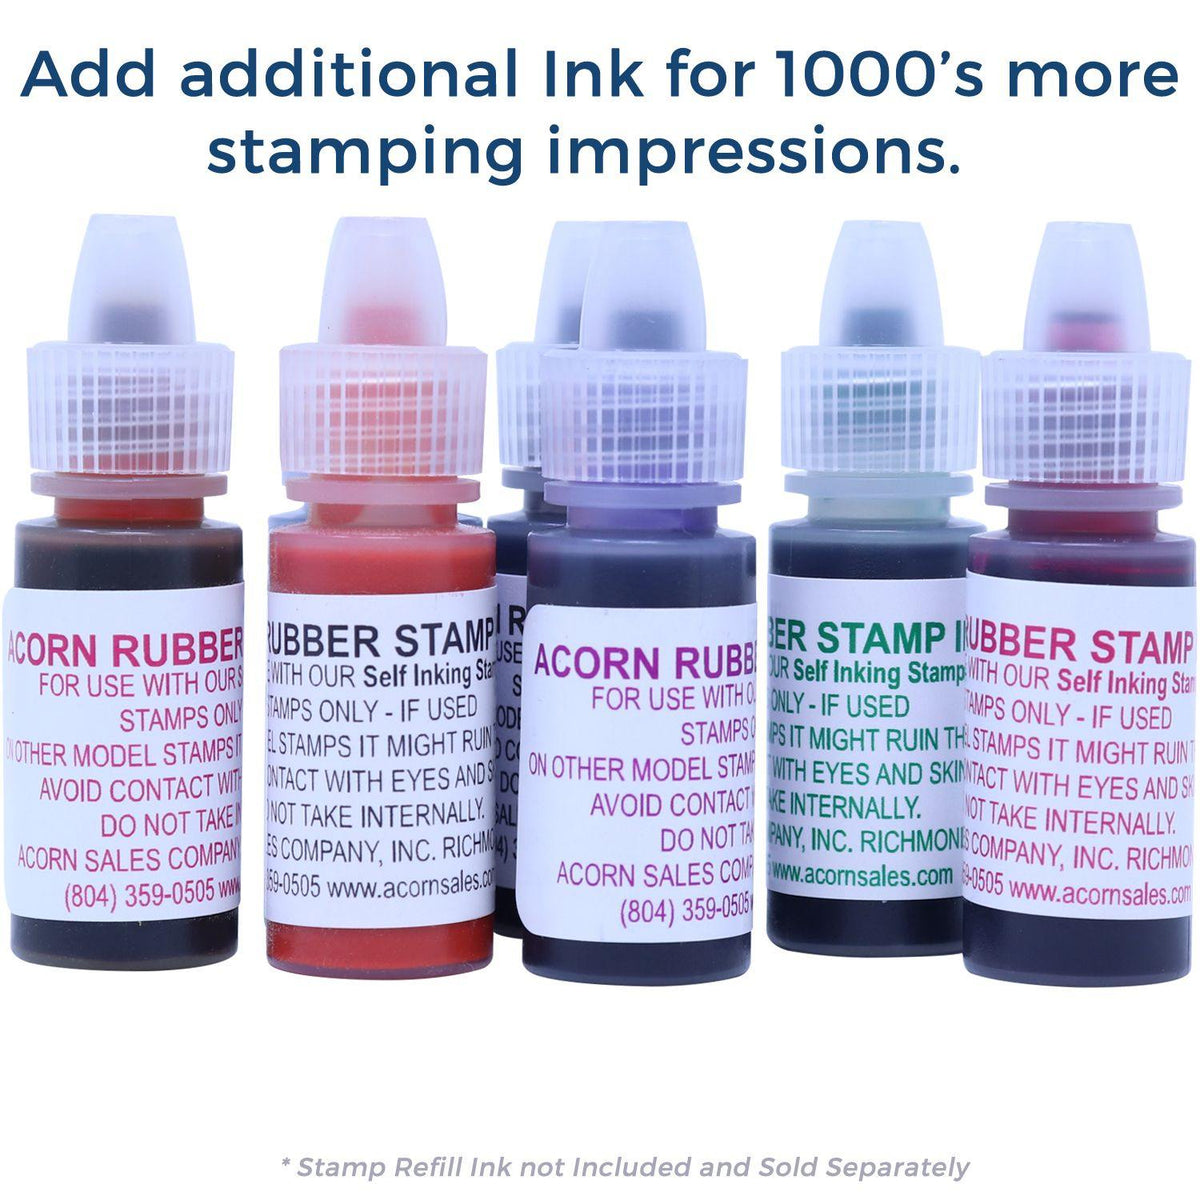 Refill Inks for Large Pre-Inked Posted with Thumbtack Stamp Available